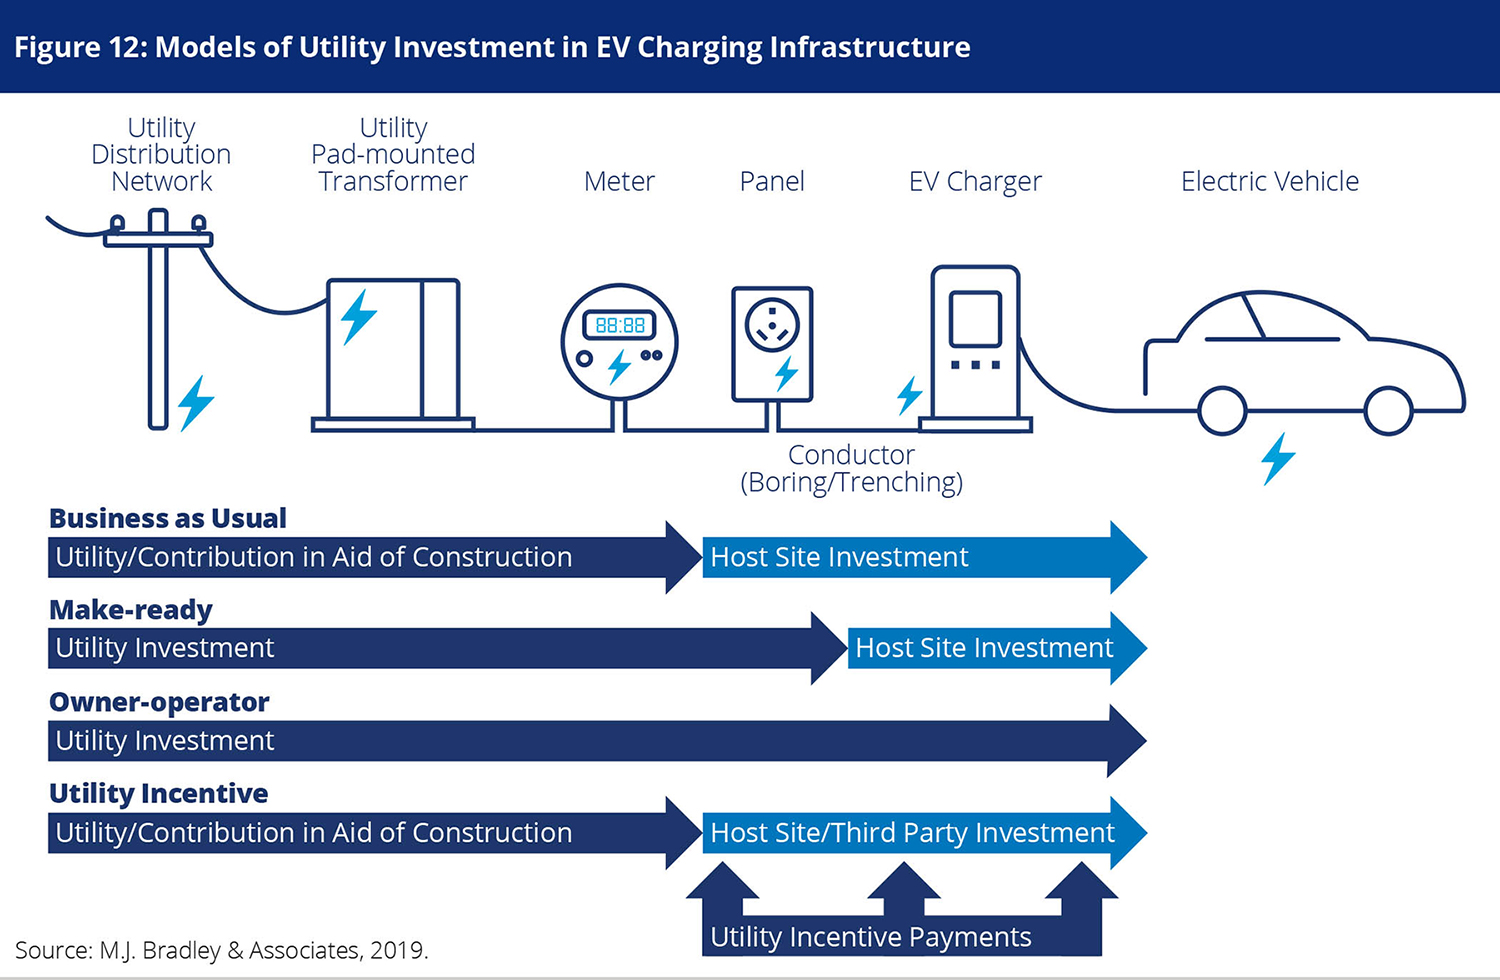 SEPA Report Highlights Trillion Dollar EV Opportunity for Prepared and